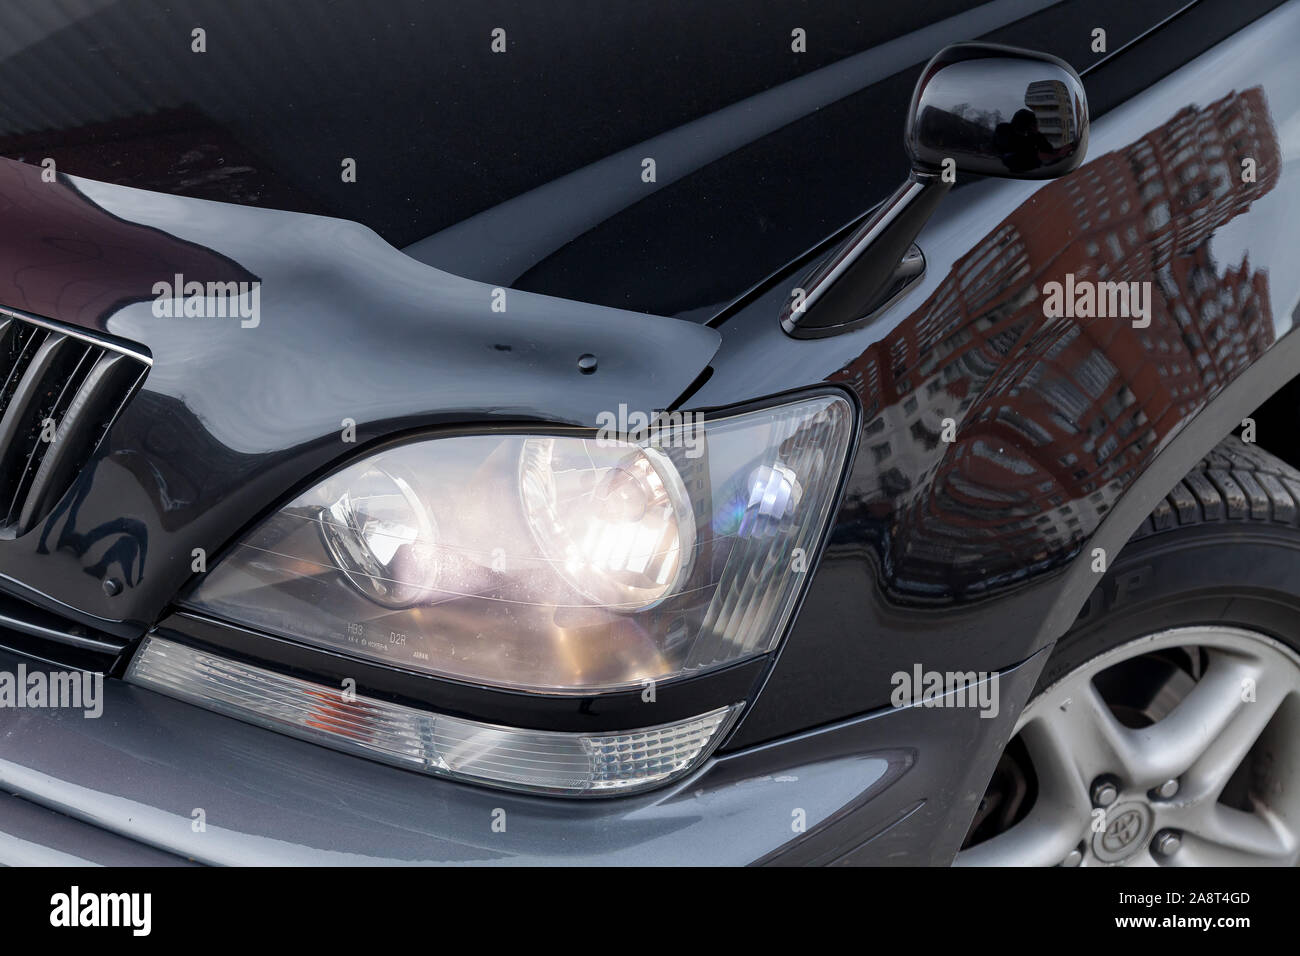 Novosibirsk, Russia - 11.05.2019: Black Toyota Harrier or Lexus RX300 1997 year headlight and mirror view with gray interior in excellent condition in Stock Photo